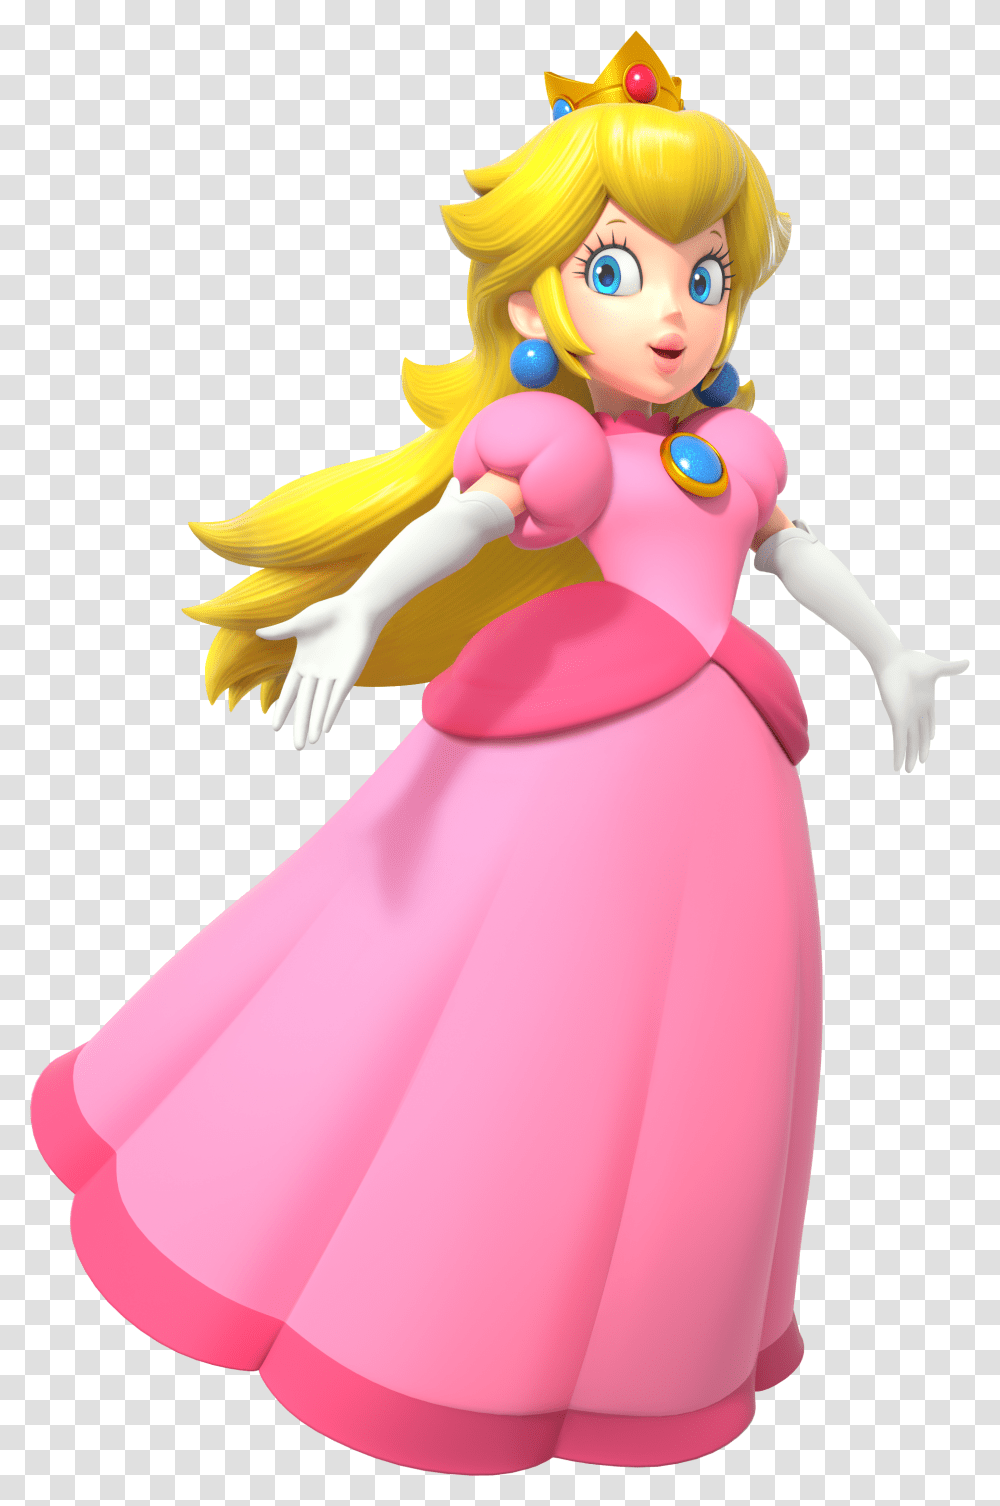 We Are Peach Official Wikia Princess Peach, Doll, Toy, Figurine, Barbie Transparent Png